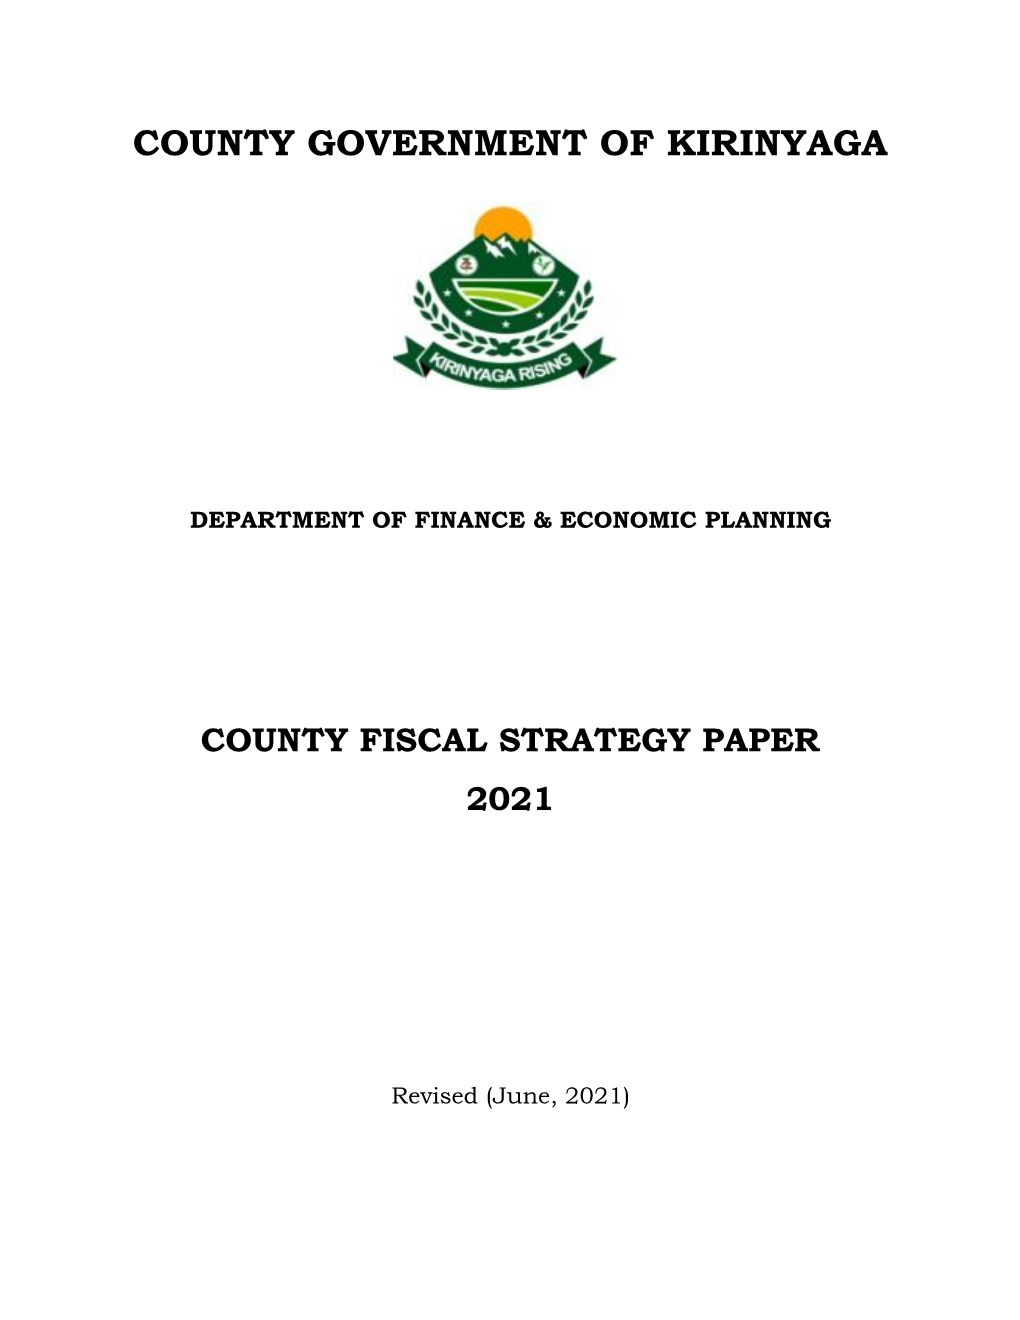 County Fiscal Strategy Paper 2021